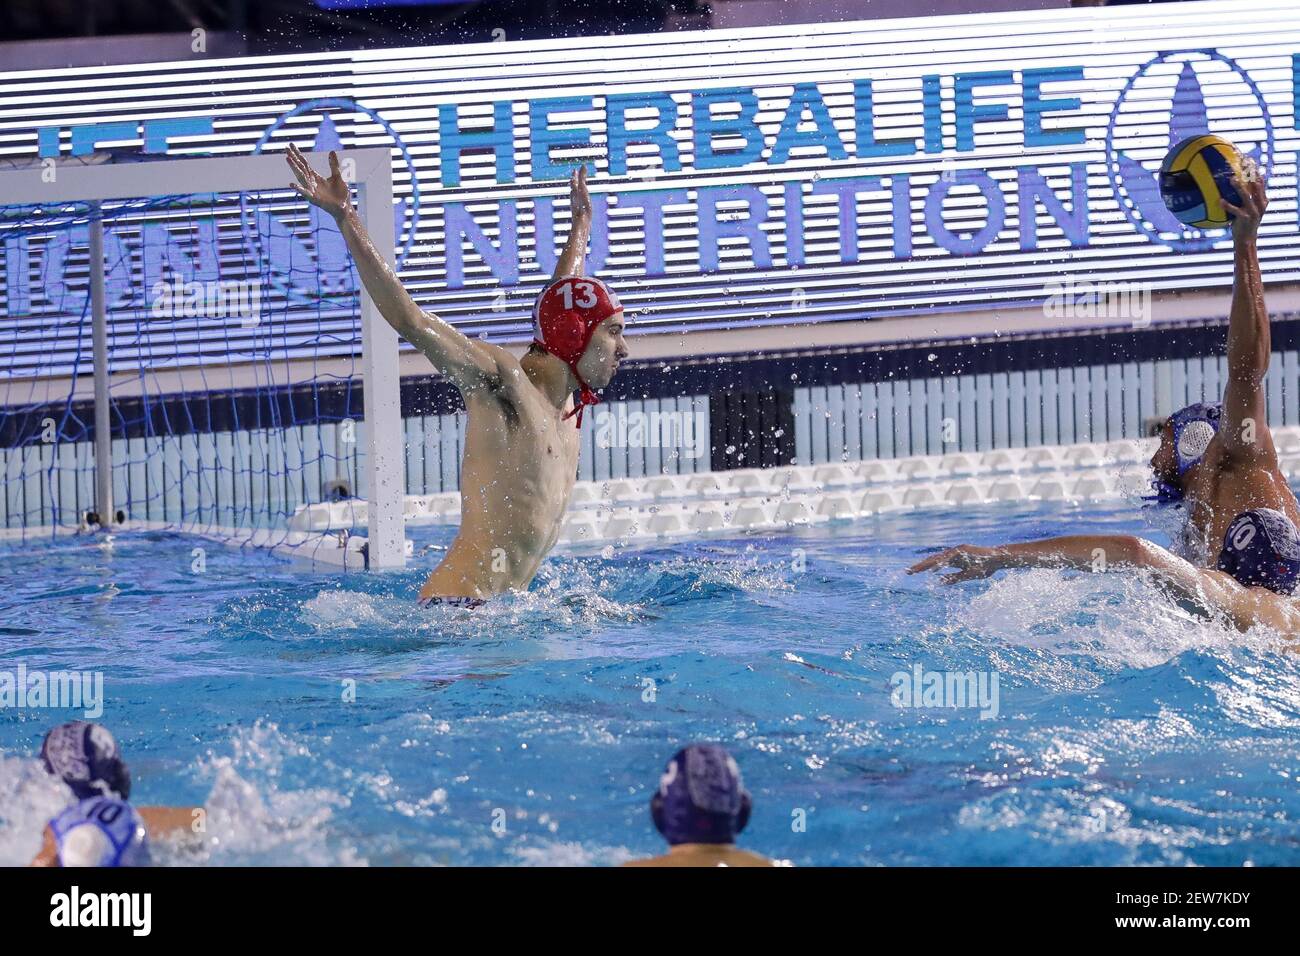 Federal Center of Swimming Pools, Rome, Italy, 02 Mar 2021, Antonio Vukojevic (Jug Adriatic) during Preliminary Round II - Pro Recco vs Jug Adriatic, LEN Cup - Champions League waterpolo match - Photo Luigi Mariani / LM Stock Photo